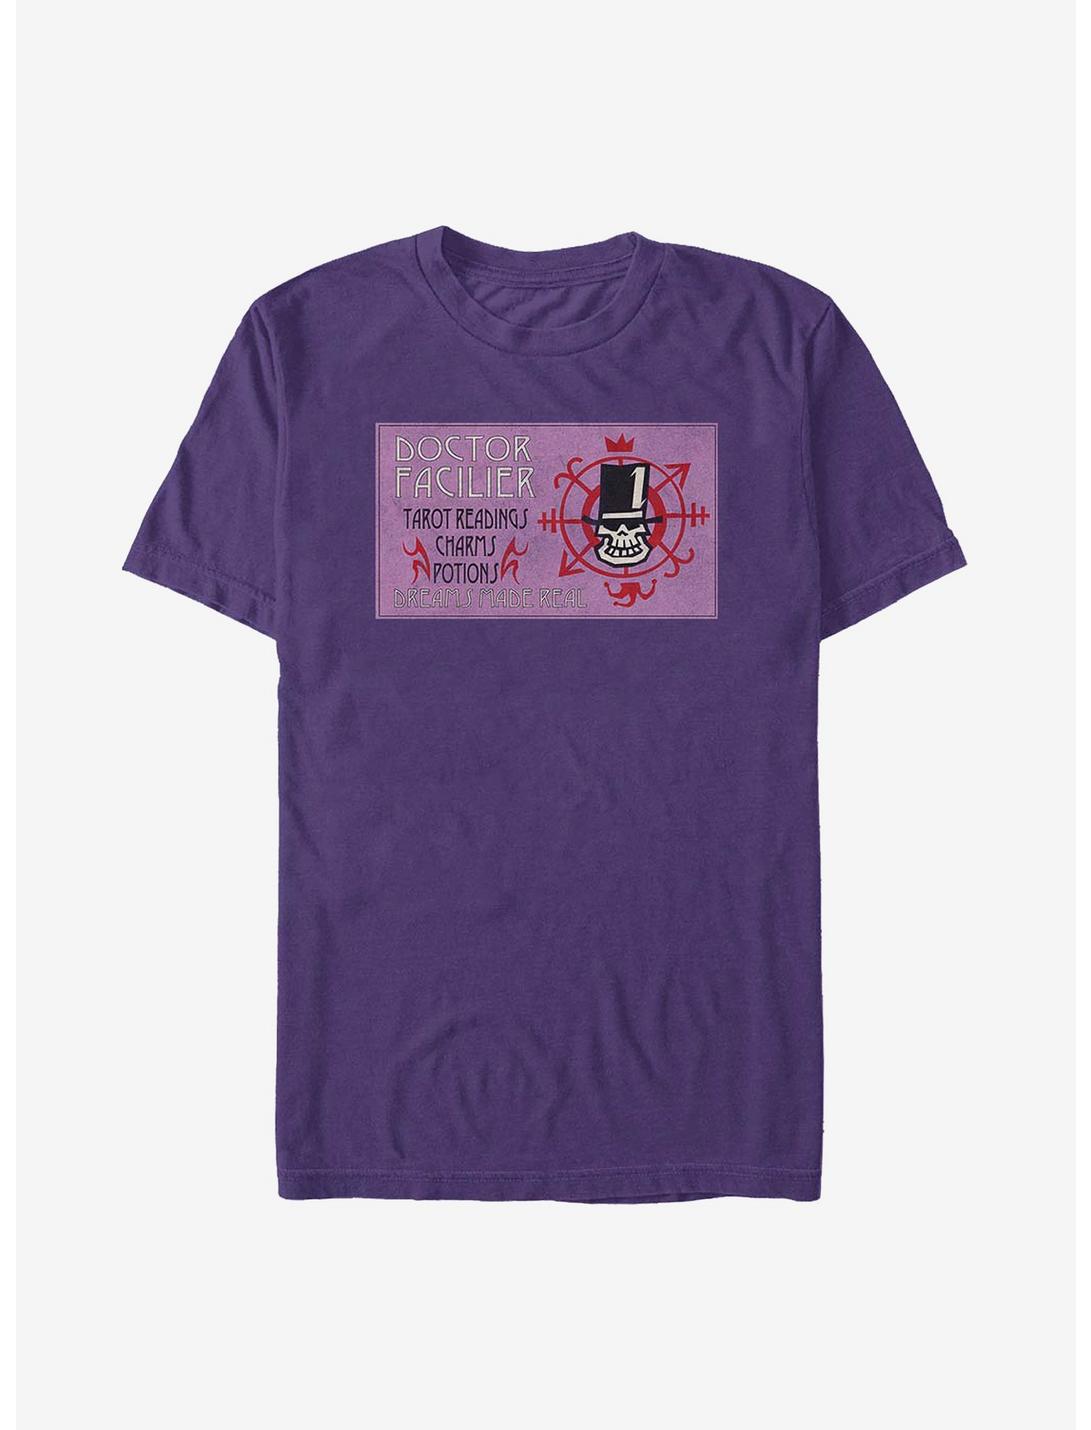 Disney The Princess And The Frog Facilier Card T-Shirt, PURPLE, hi-res